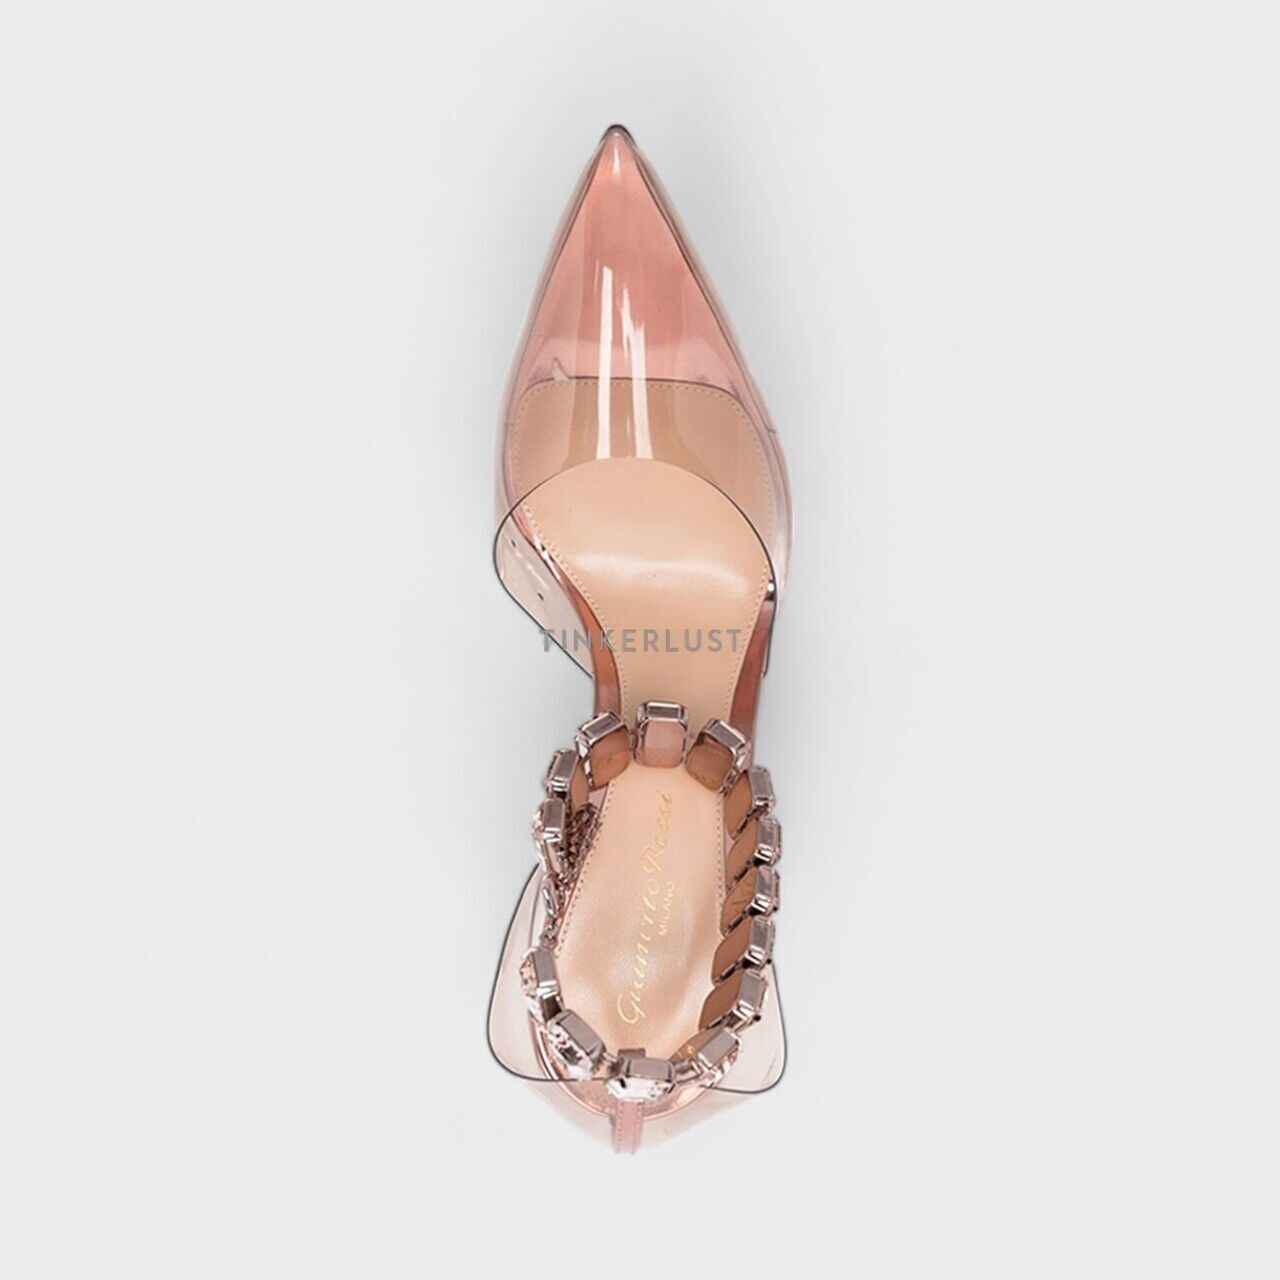 Gianvito Rossi Plexi Ankle Strap Pumps Peach with Crystals Heels